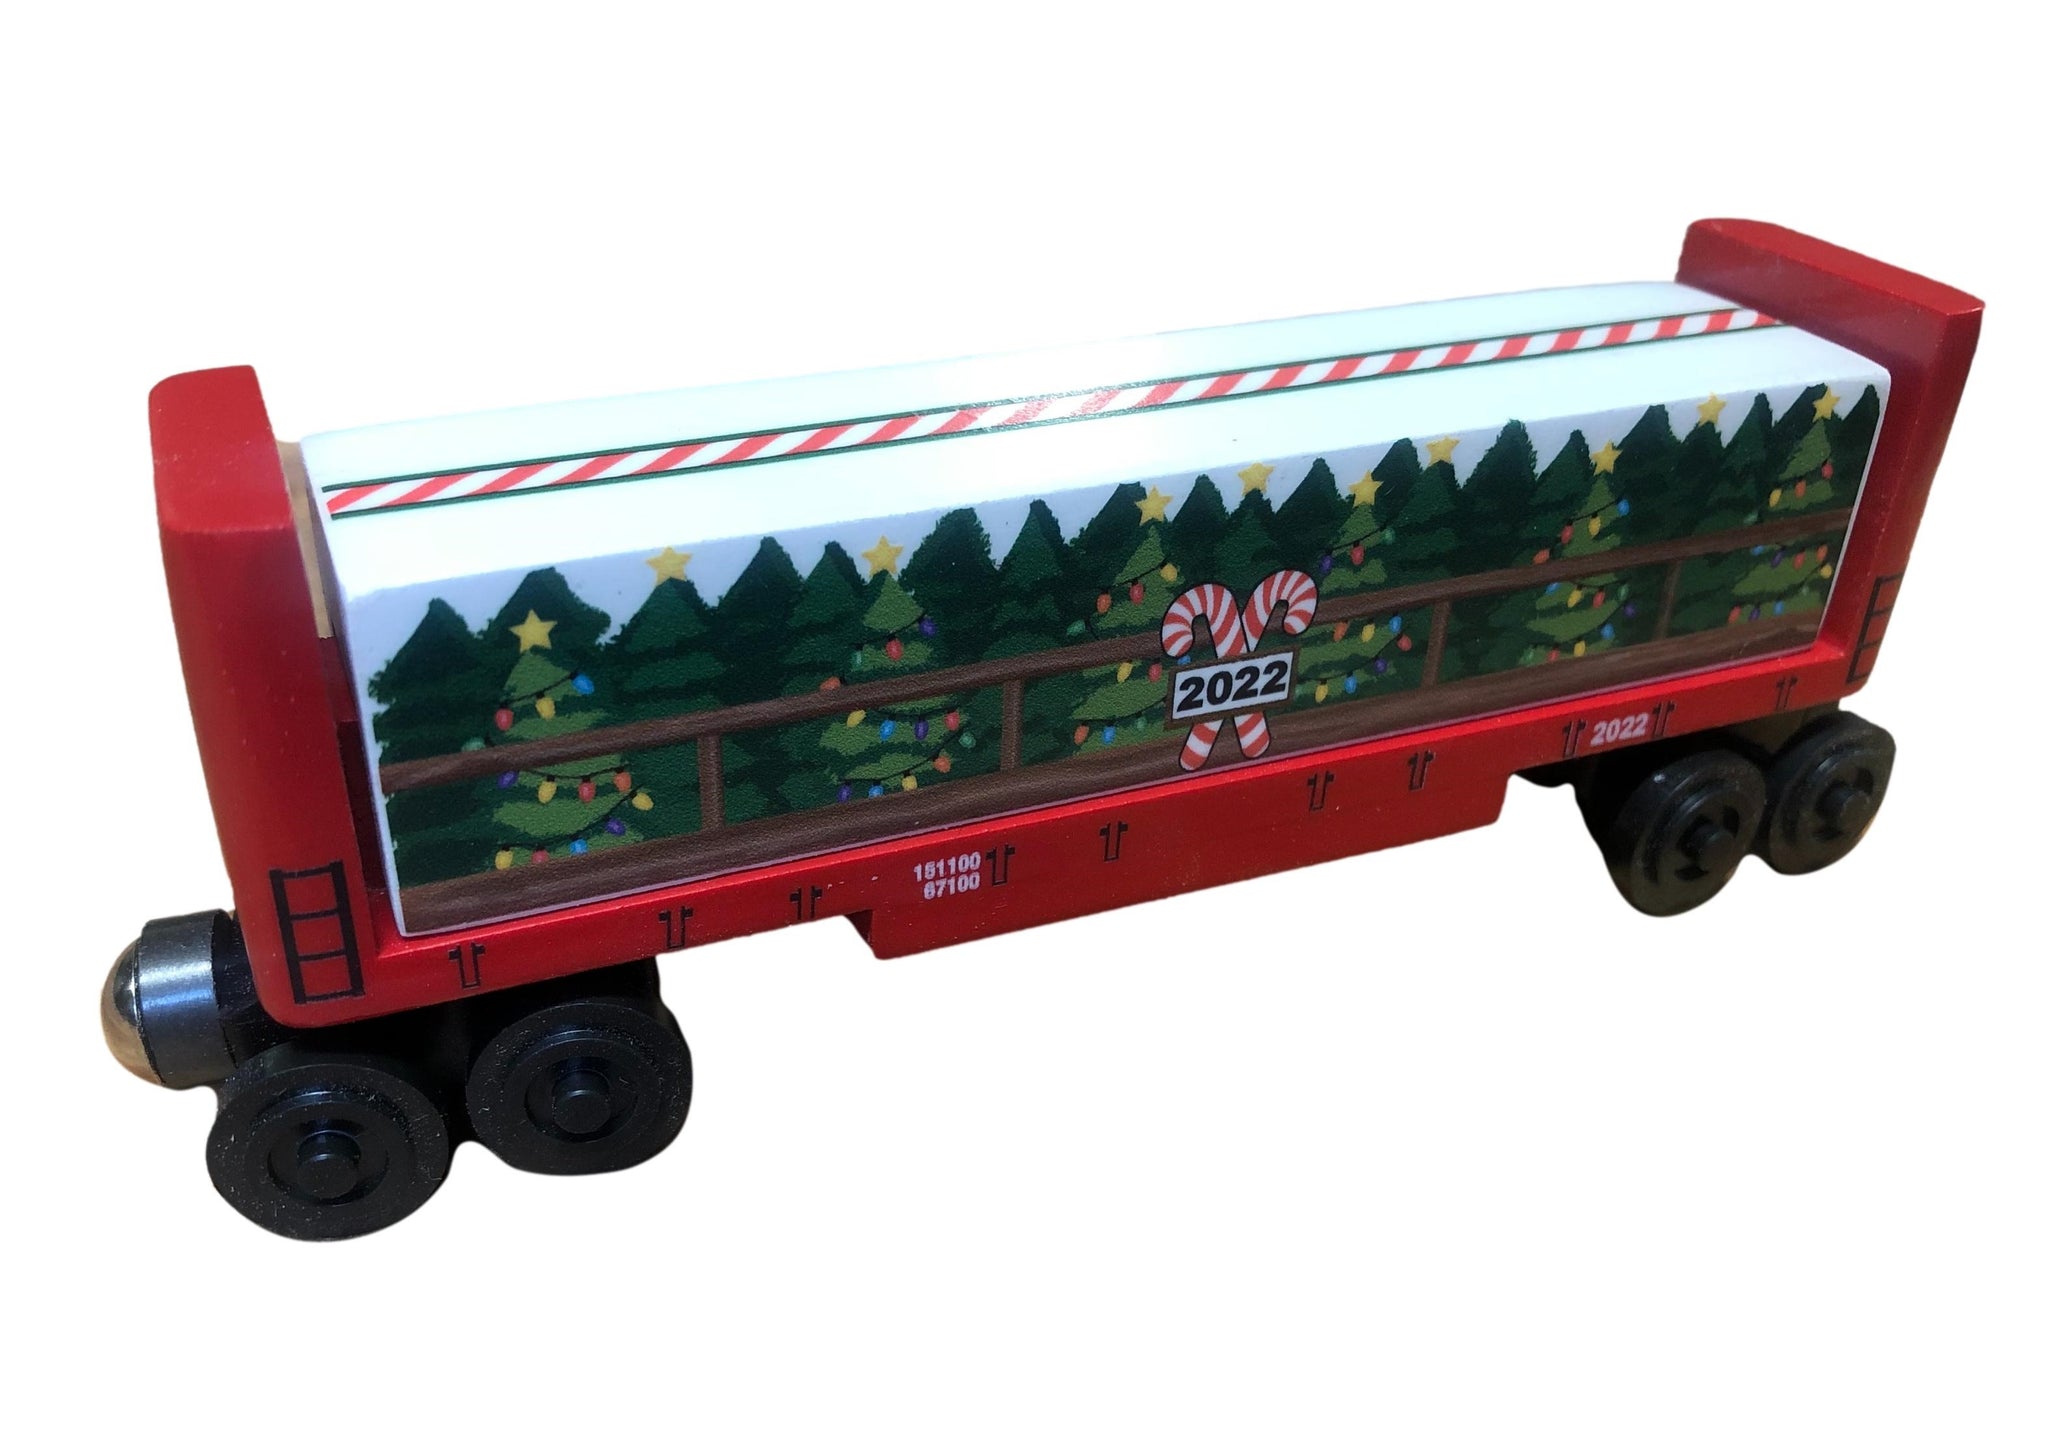 2022 Whittle Christmas Tree Lumber Car Wooden Toy Train